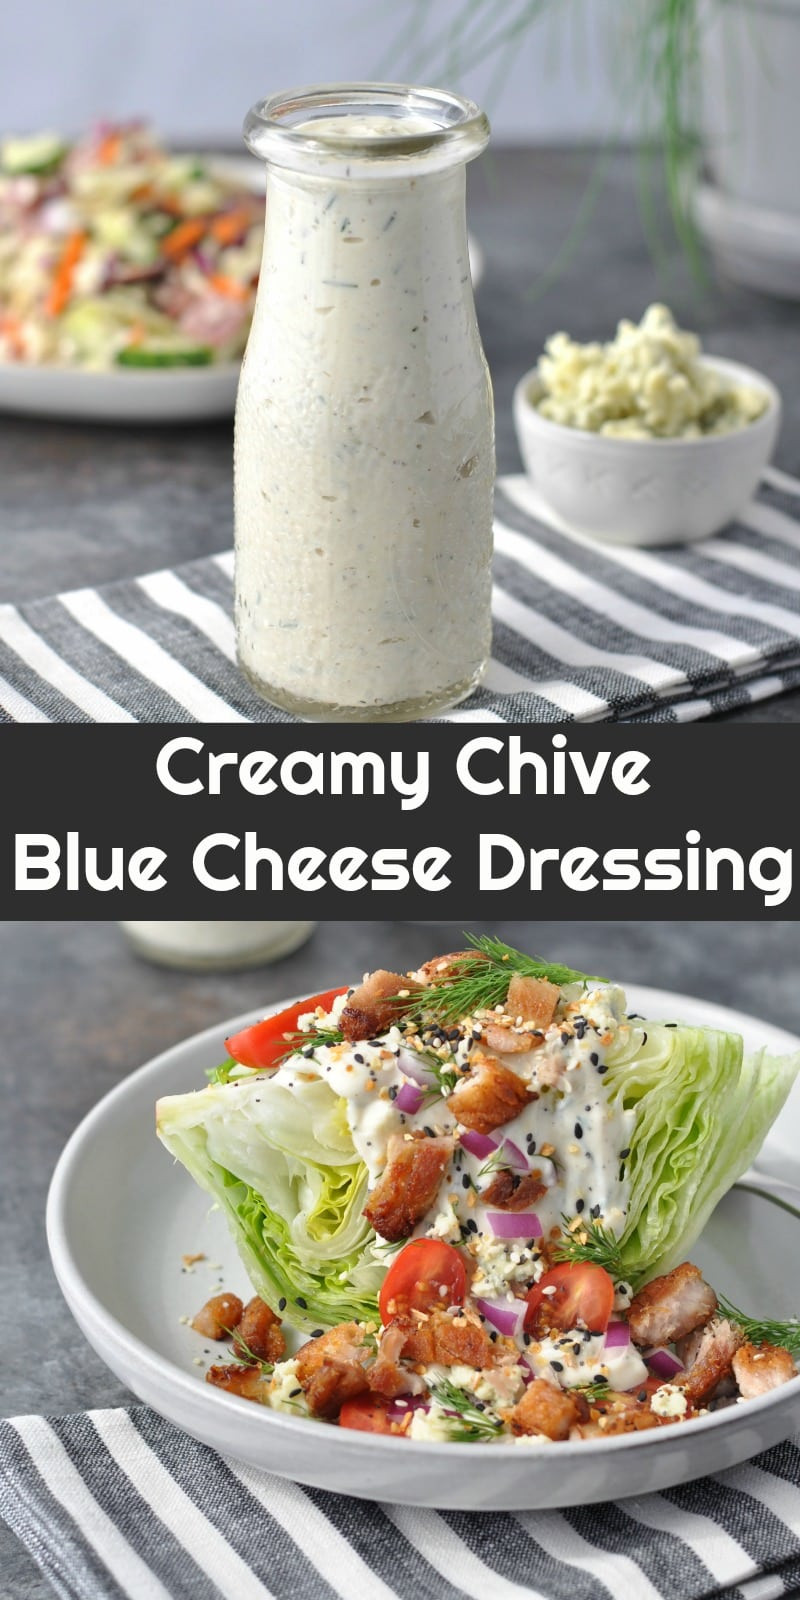 Blue Cheese Dressing Keto Diet
 Creamy Chive Keto Blue Cheese Dressing